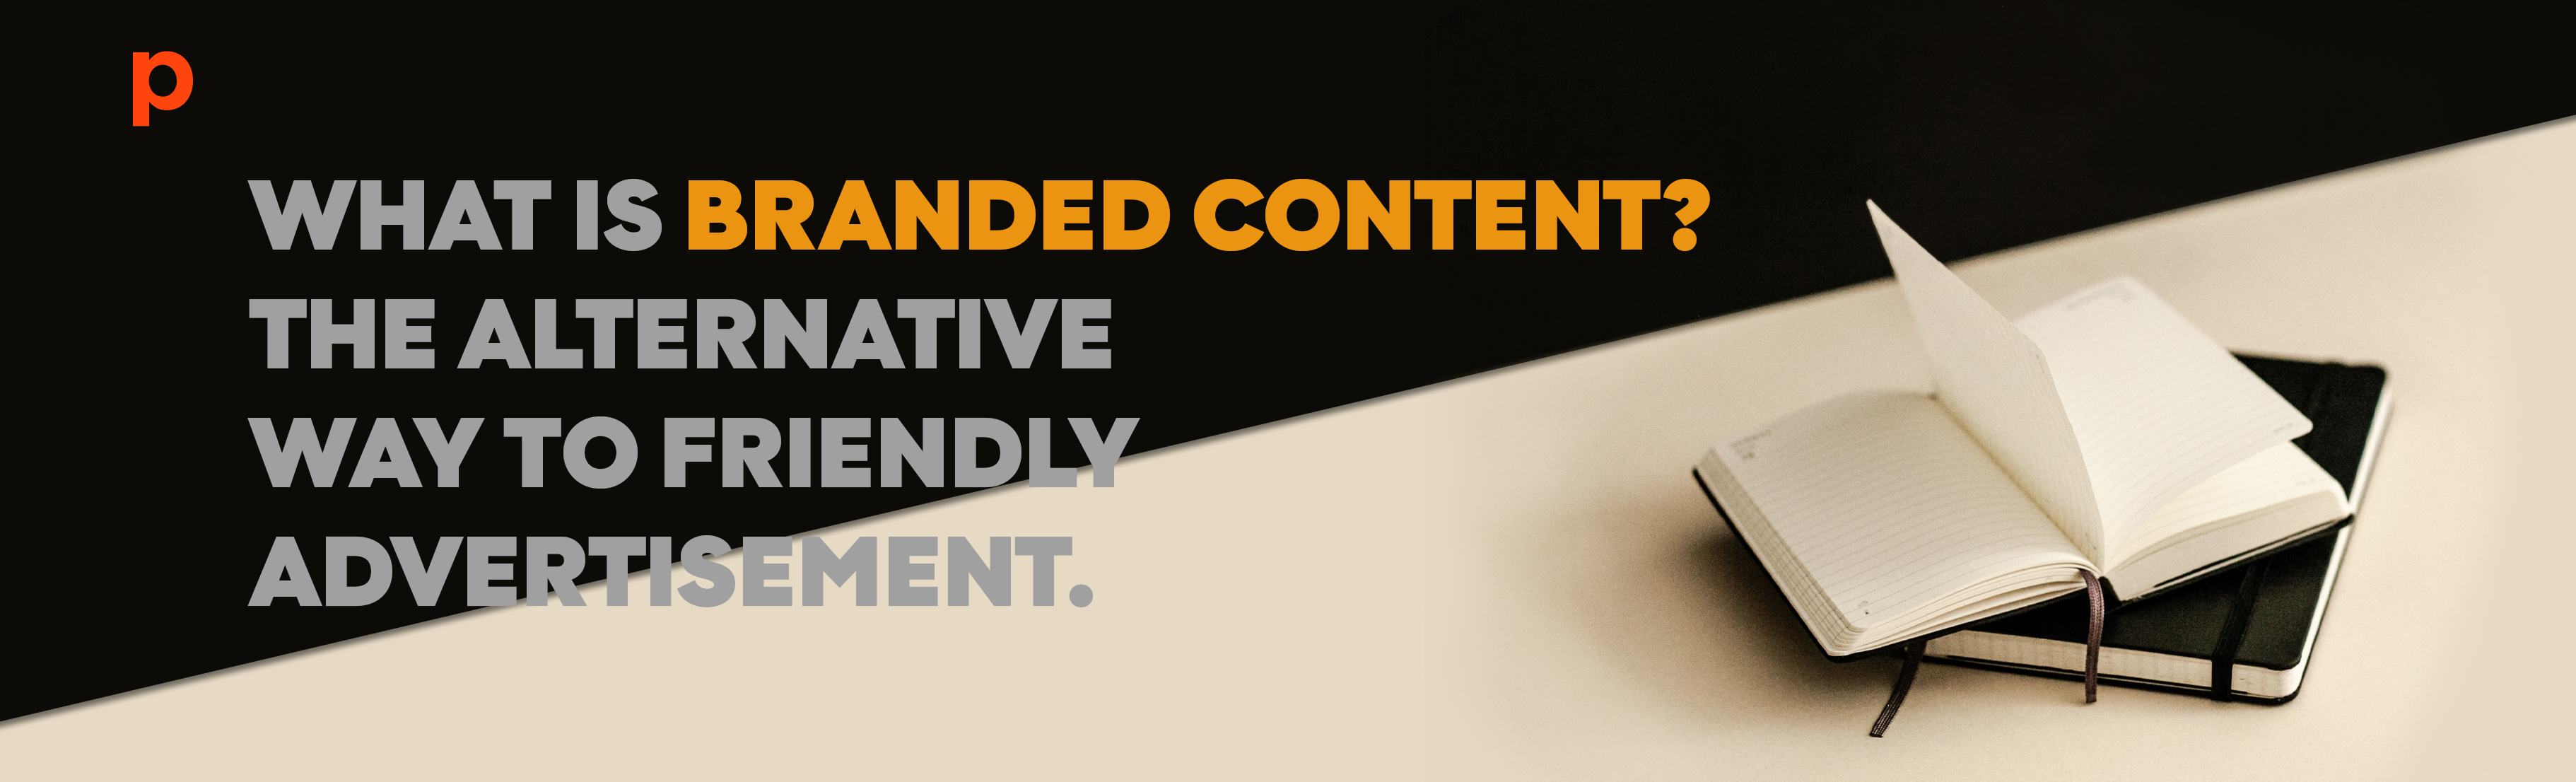 What is branded content? The alternative way to friendly advertisement.